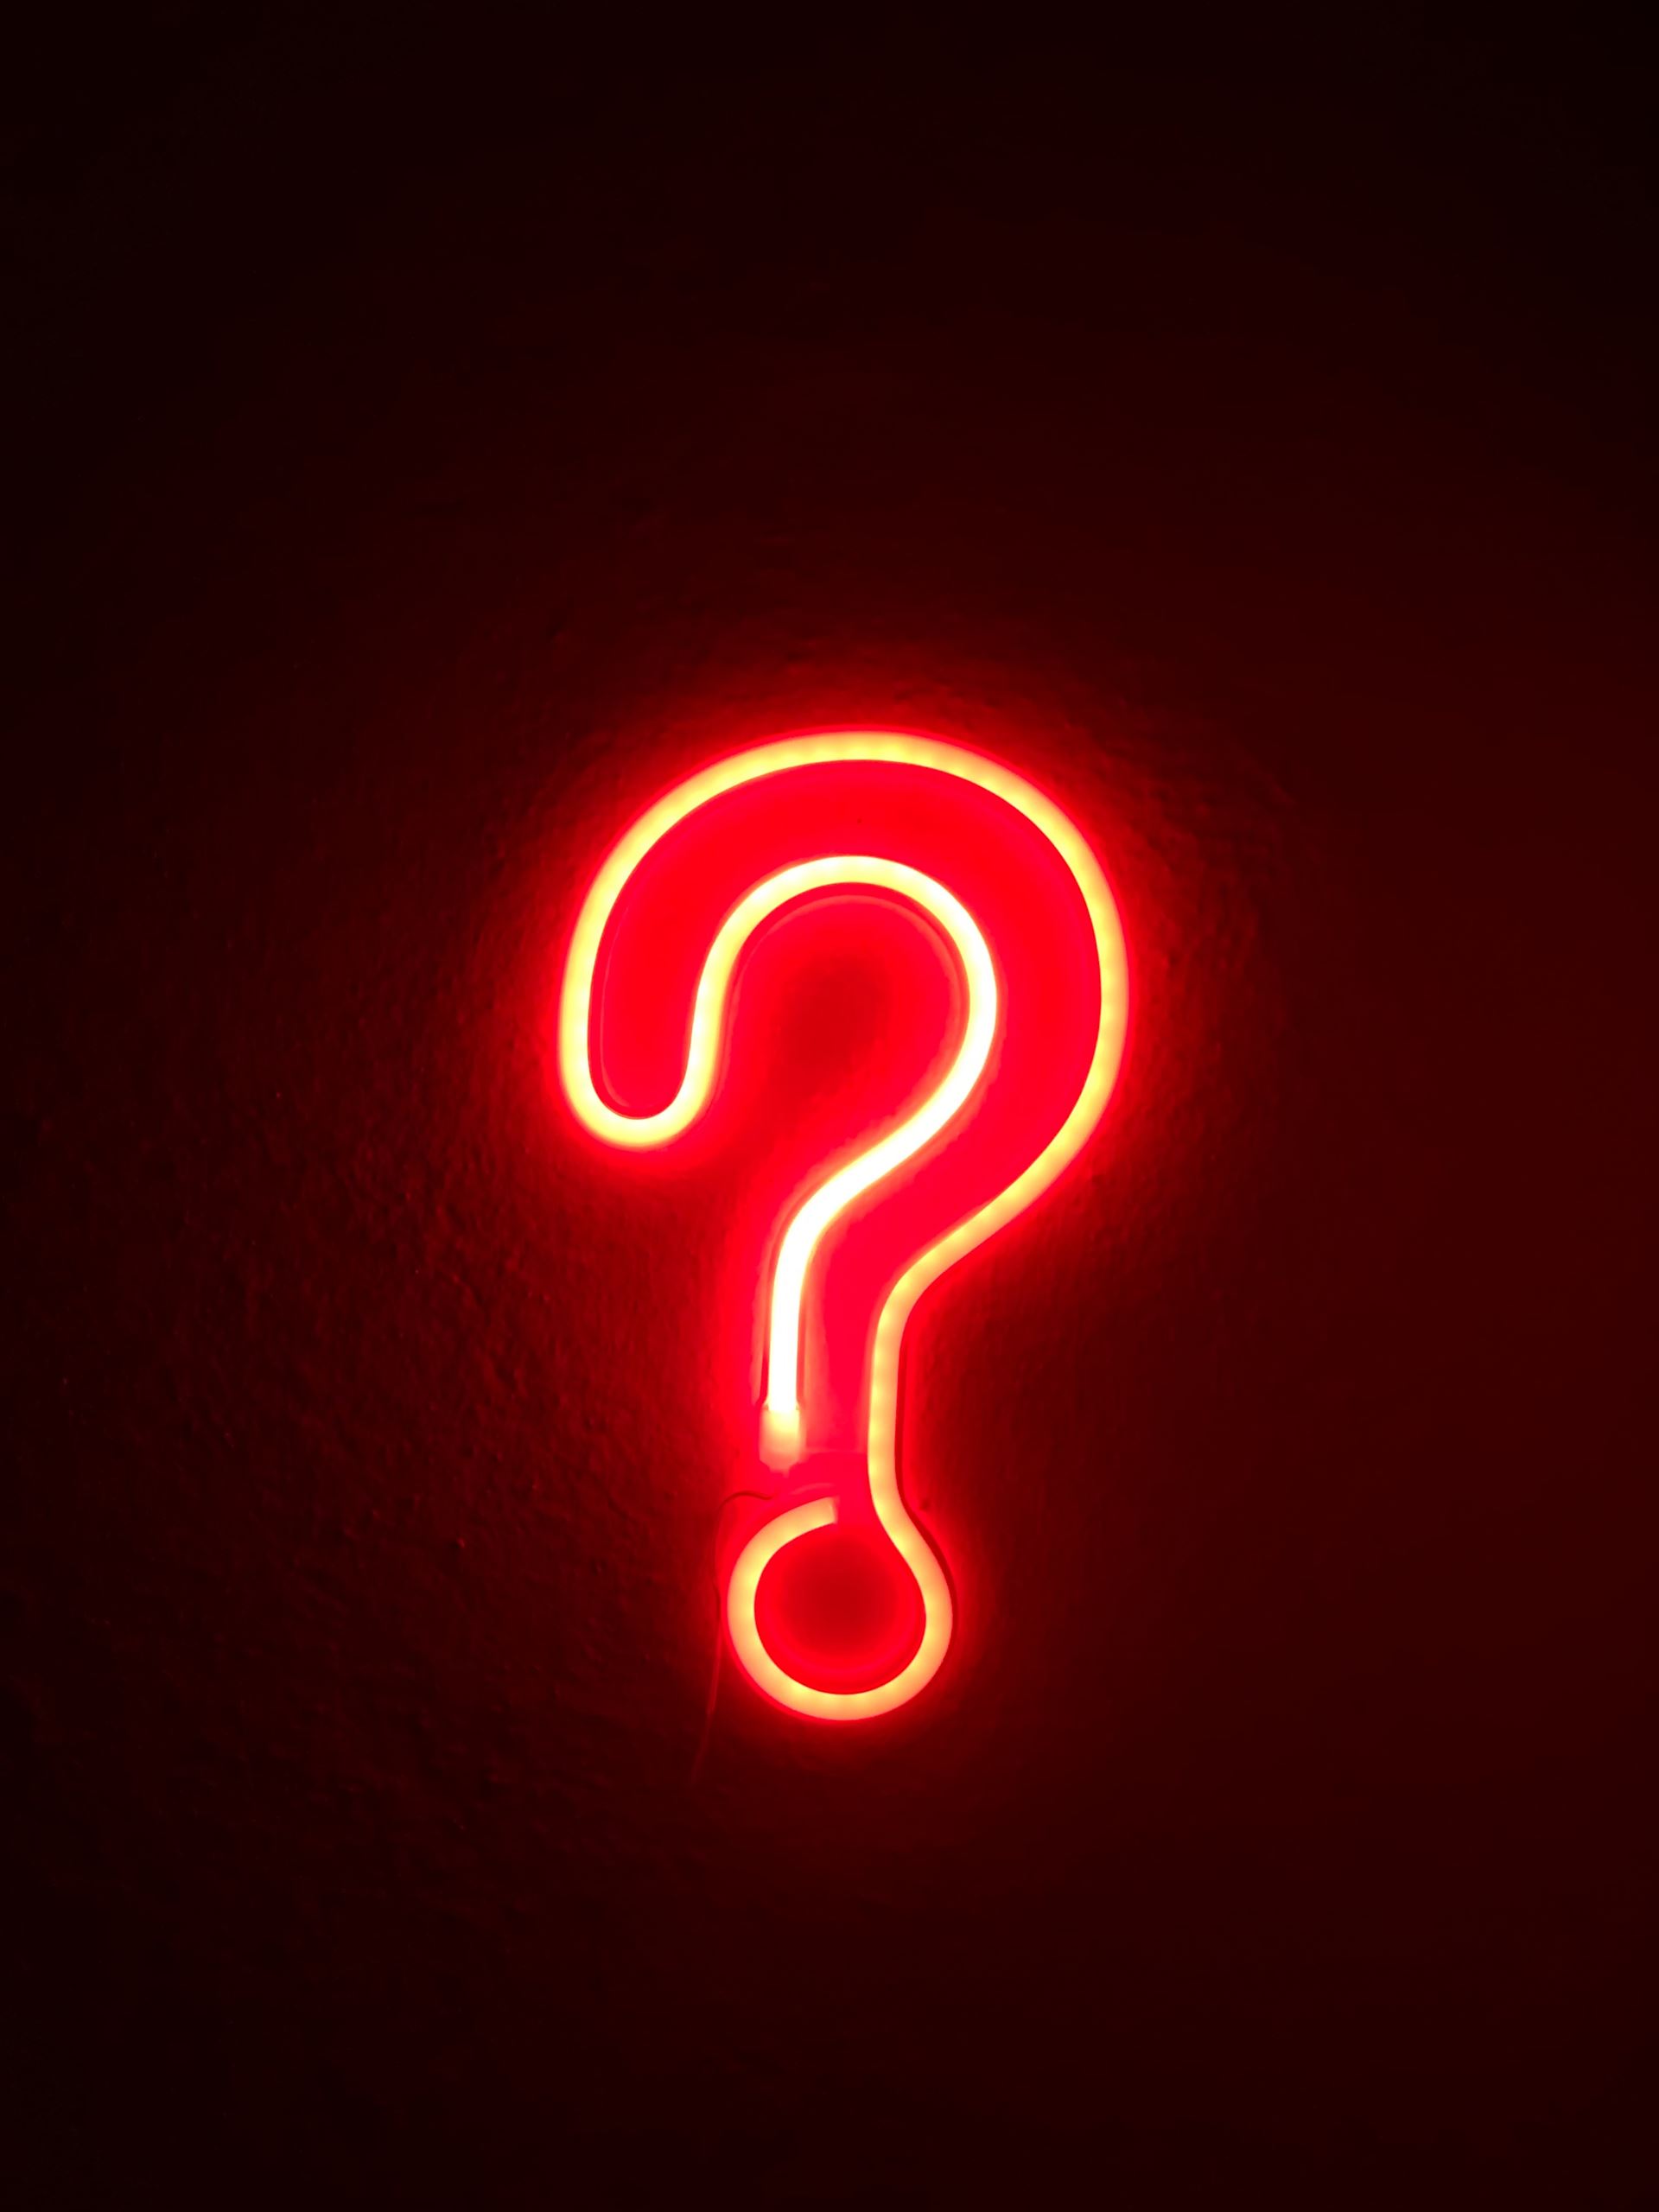 A question mark made from a neon light